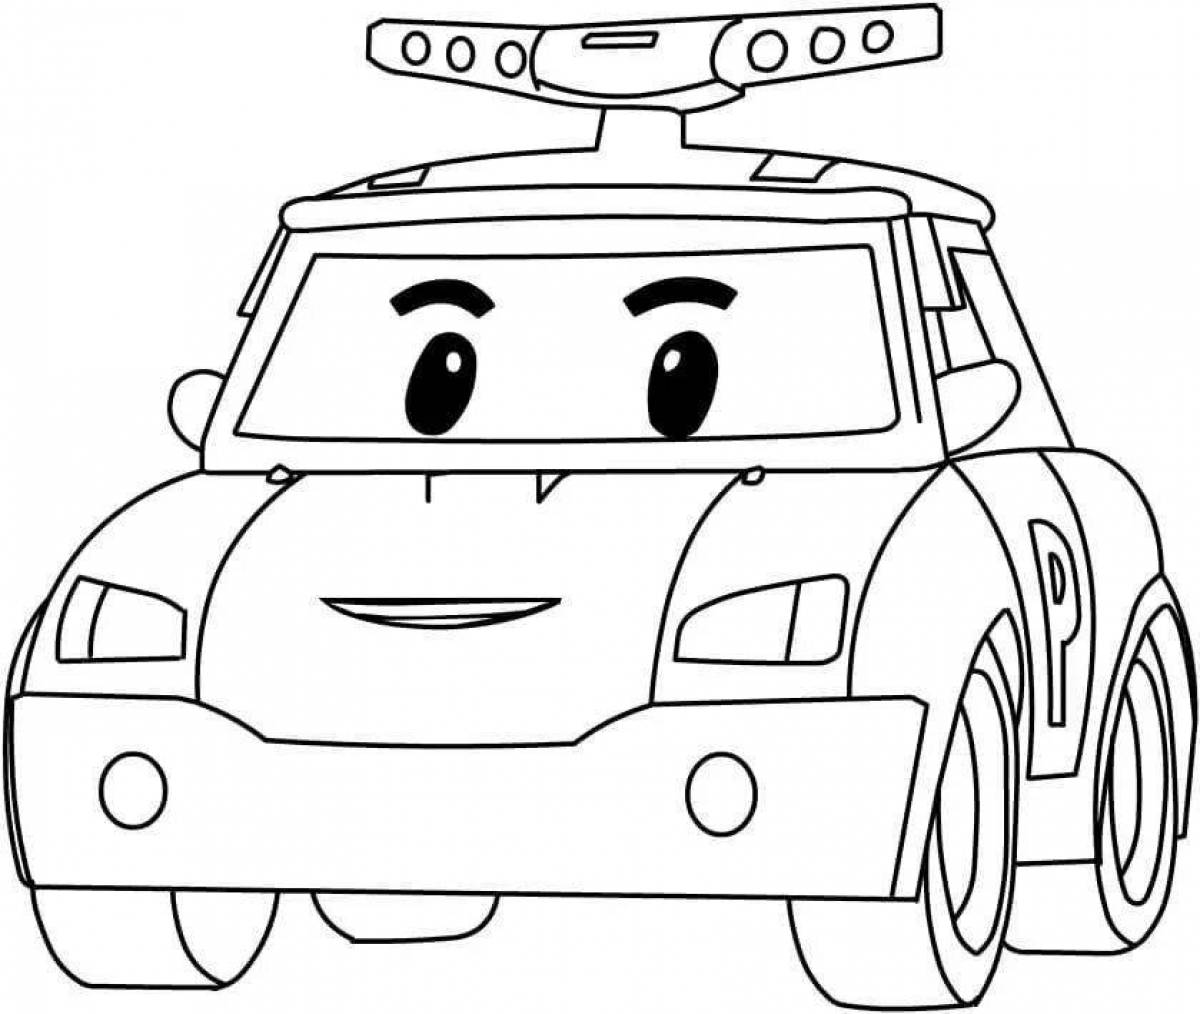 Delightful coloring robocar poly game